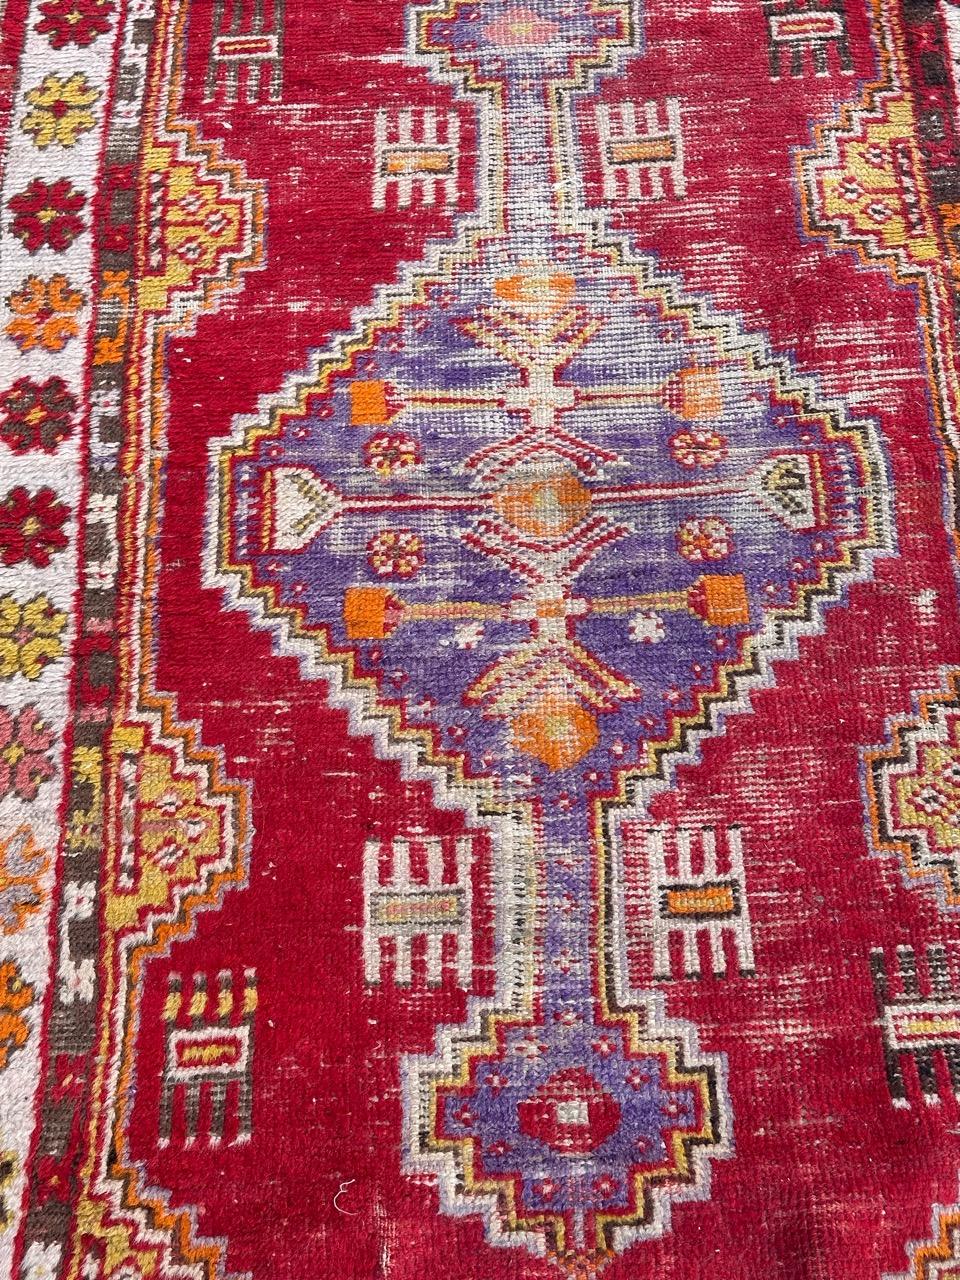 Pretty early 20th century Turkish rug entirely hand knotted with wool velvet on cotton foundation.
Introducing our exquisite Turkish carpet from the early 20th century, imbued with history and allure. Its authentic signs of wear tell tales of years